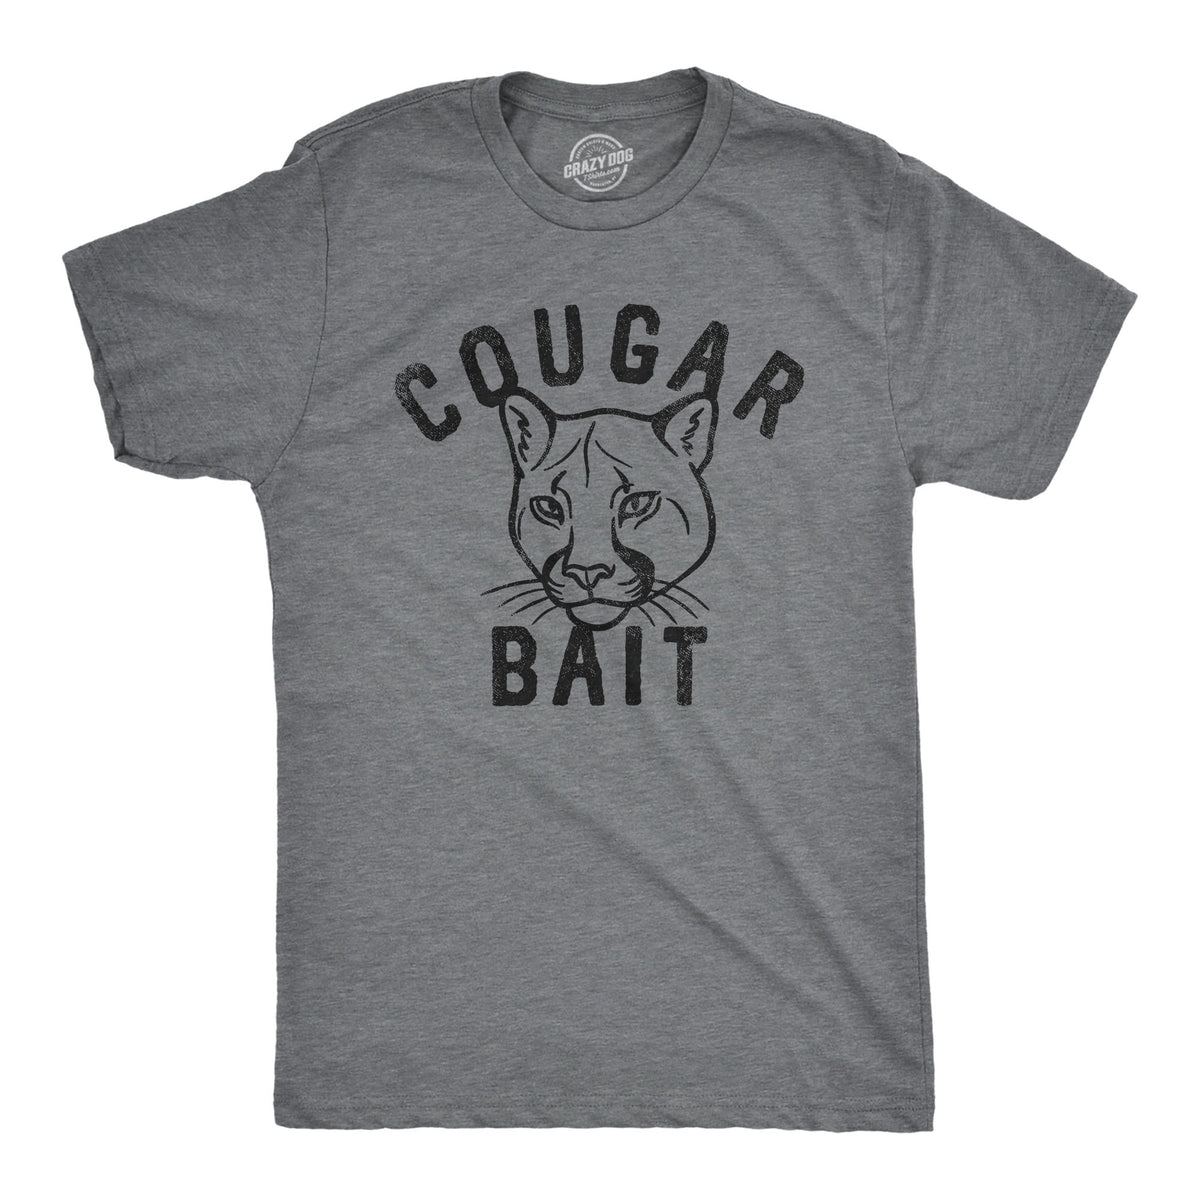 Men's Funny T Shirt The Cockfather Rooster Cougar Bait Tee